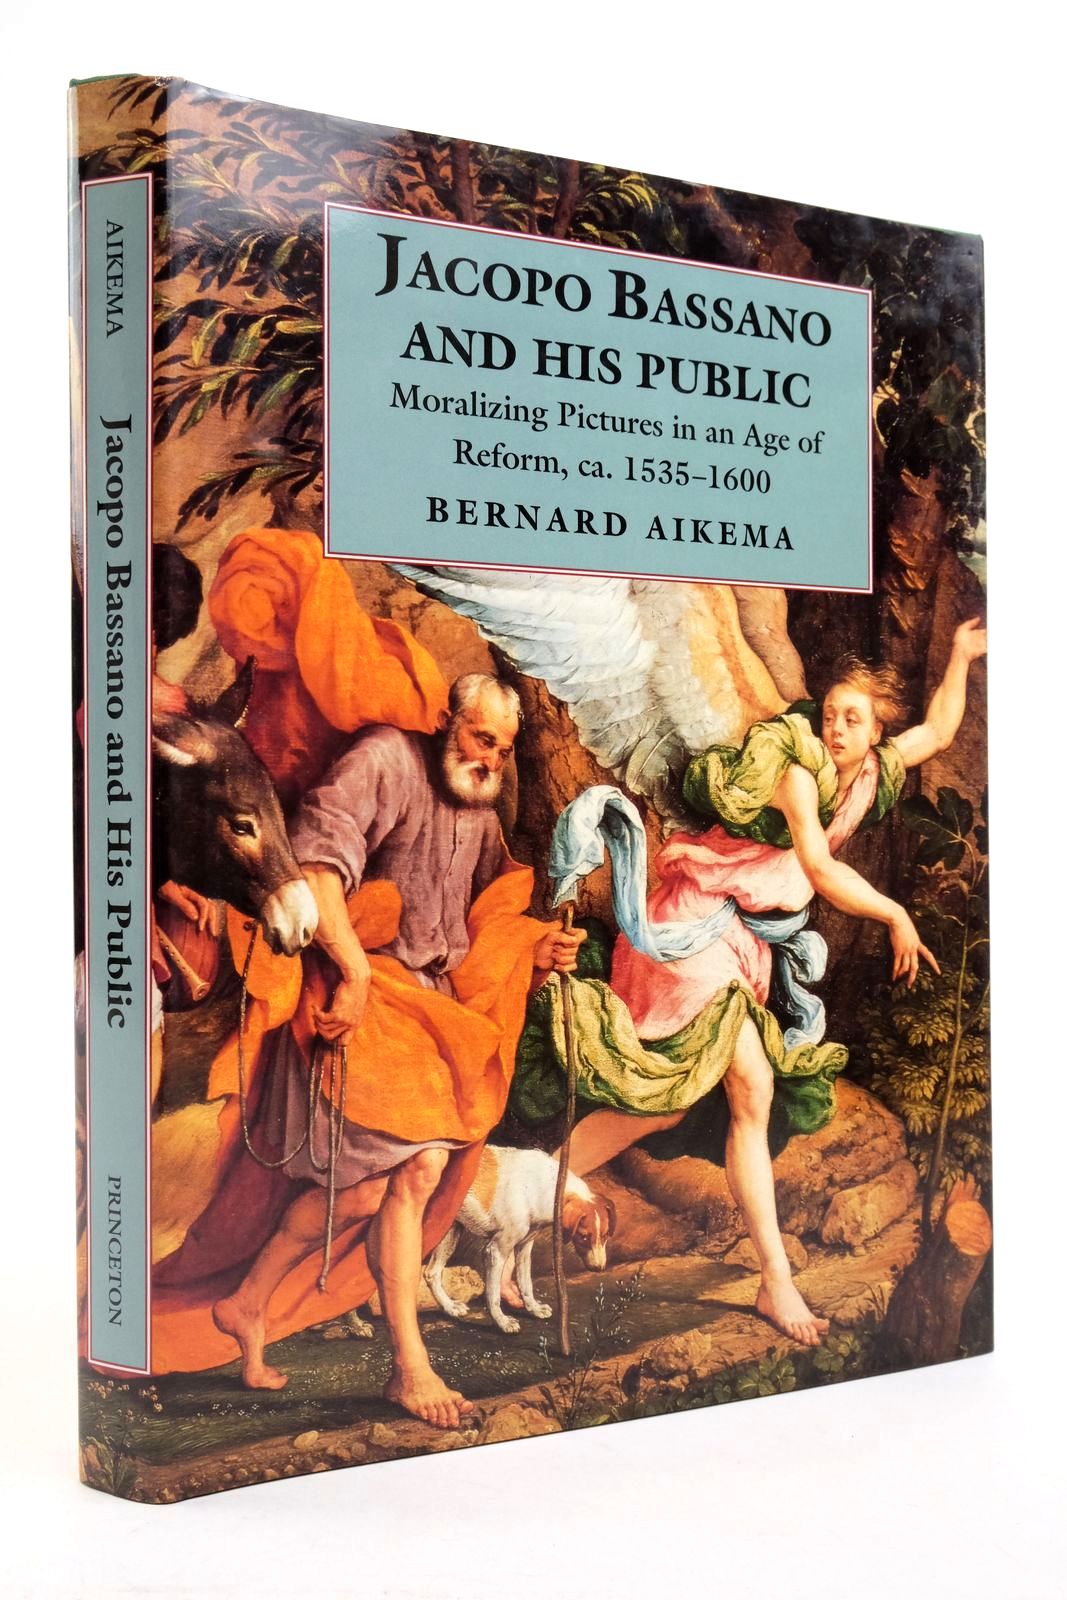 Photo of JACOPO BASSANO AND HIS PUBLIC written by Aikema, Bernard illustrated by Bassano, Jacopo published by Princeton University Press (STOCK CODE: 2138925)  for sale by Stella & Rose's Books